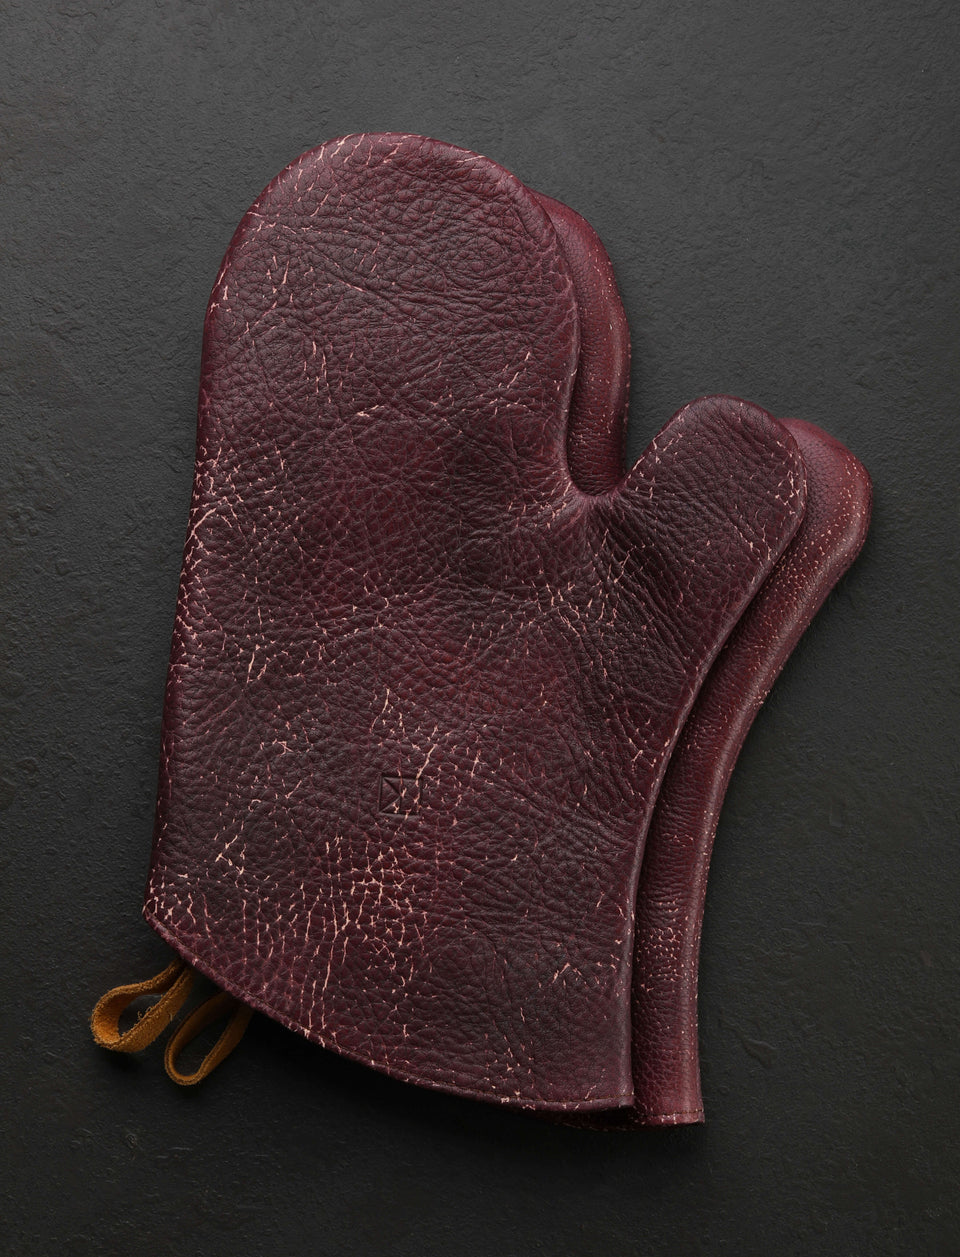 Linny Kenney Leather - New Hampshire Accessories & Apparel Eggplant Leather Oven Mitts